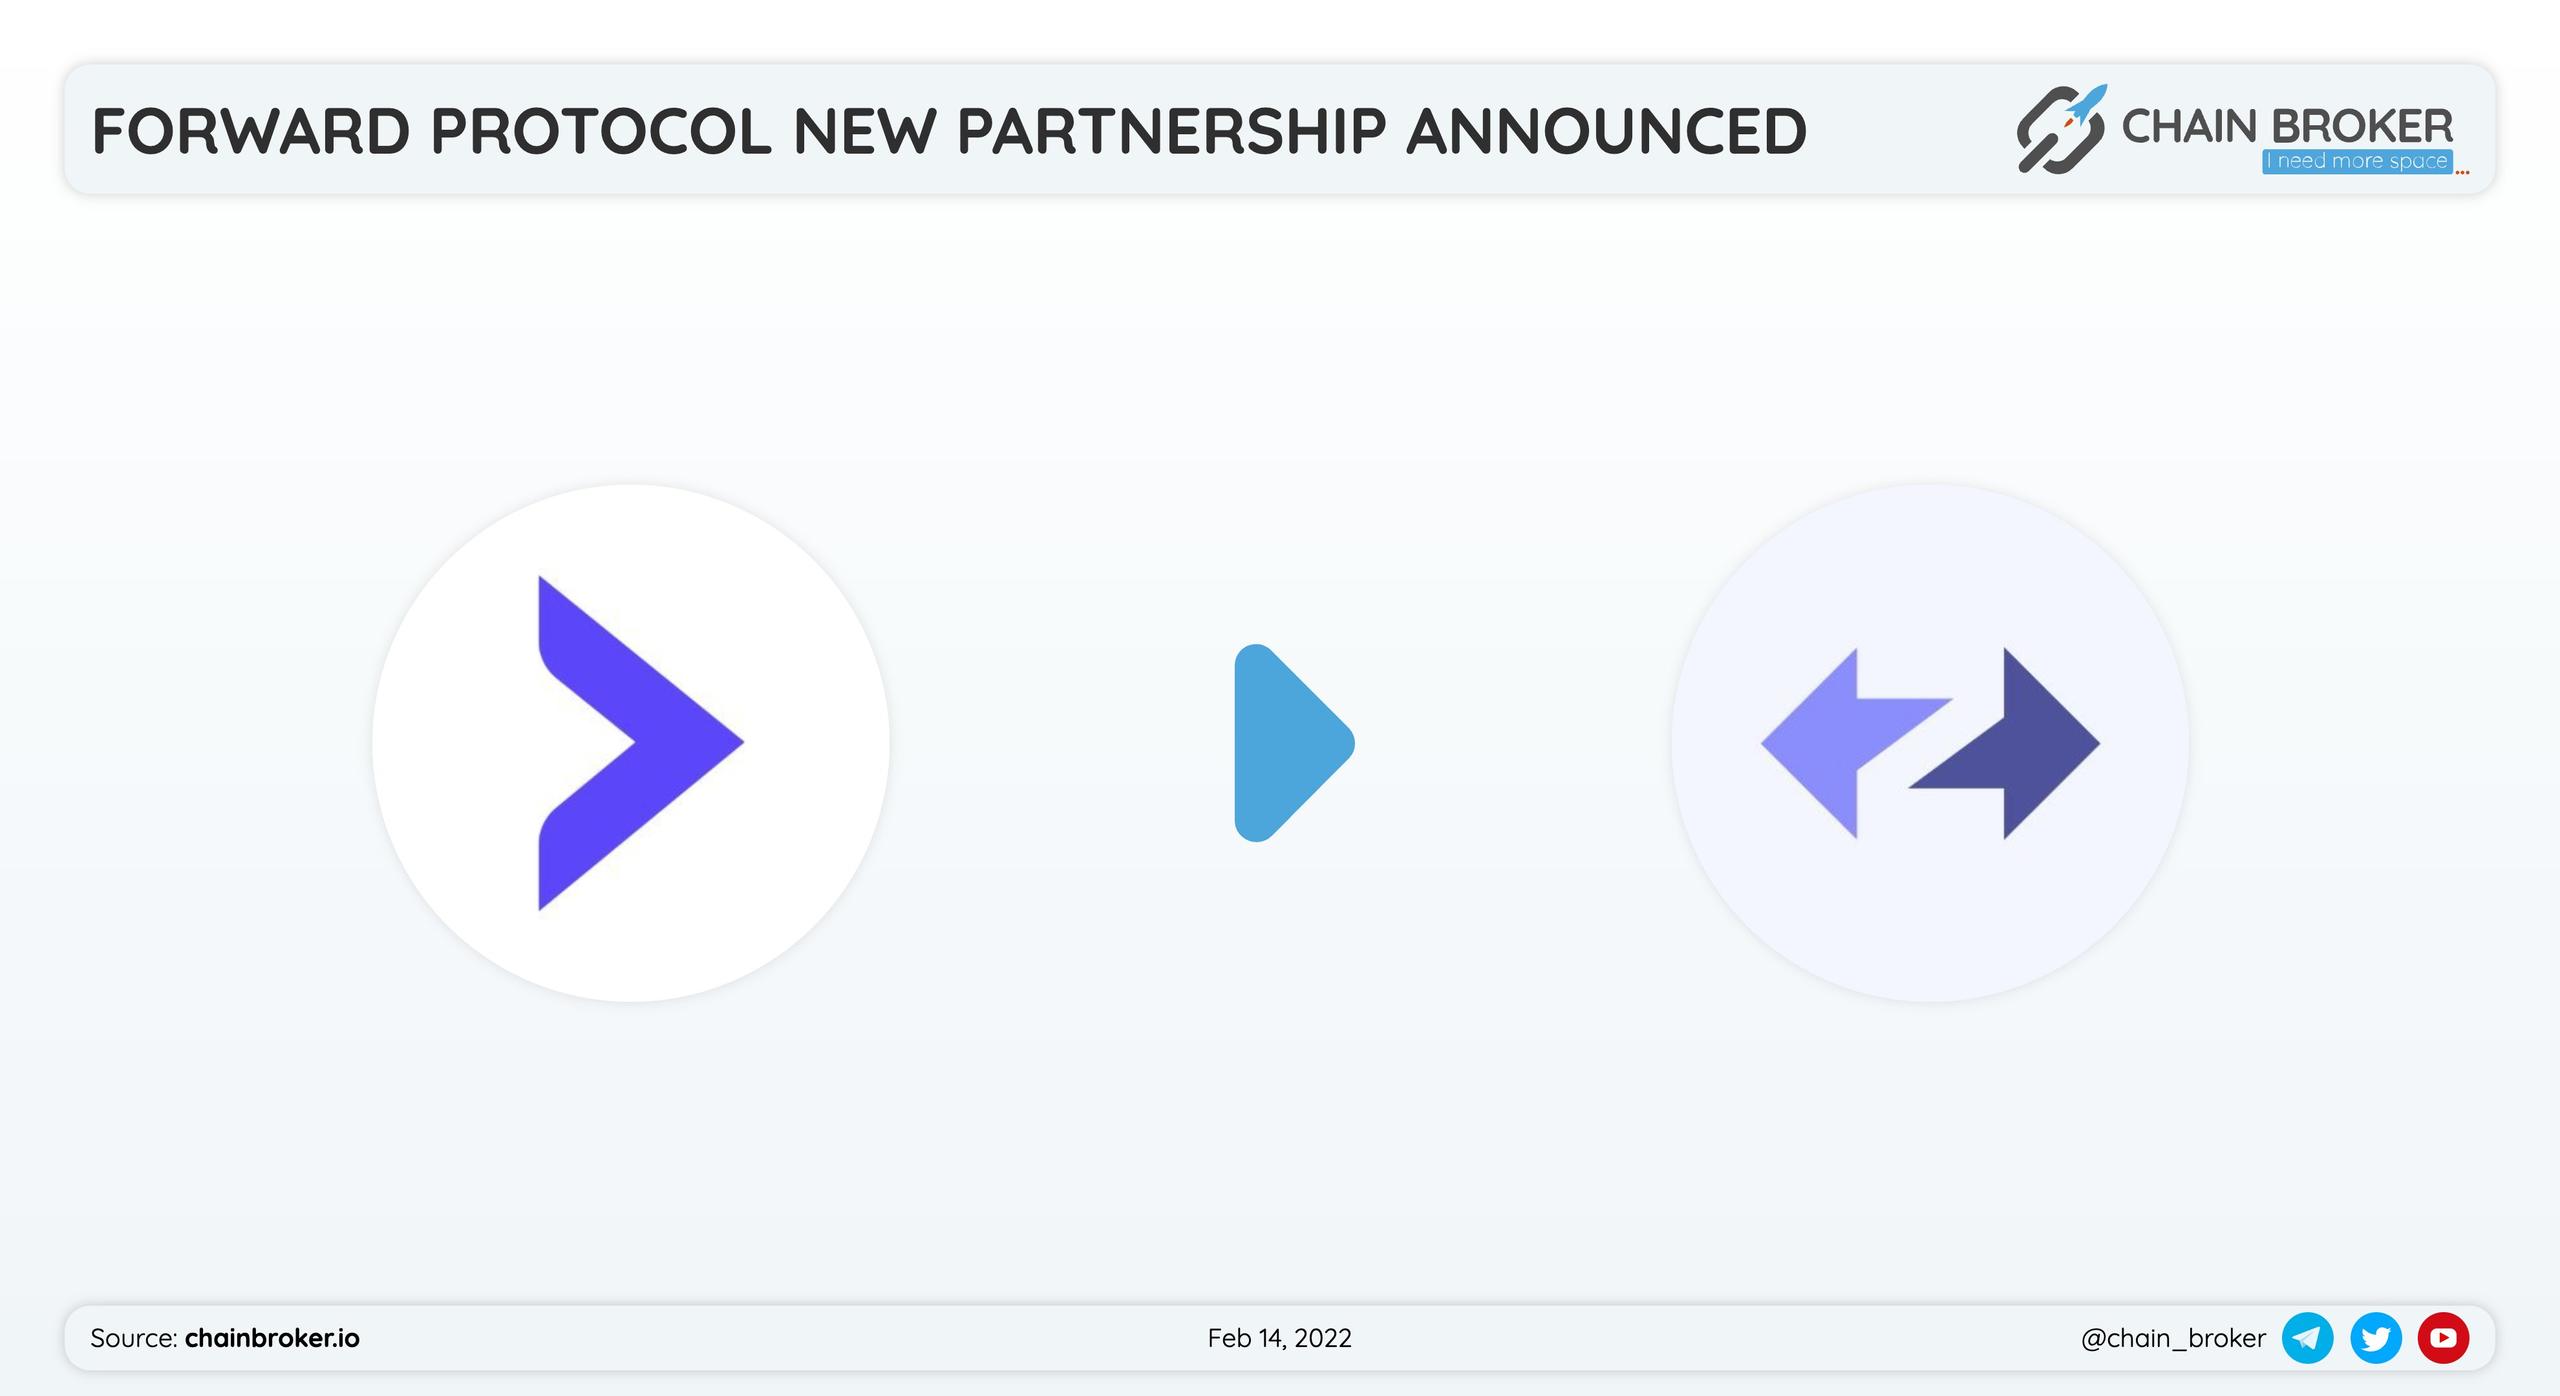 Forward Protocol has partnered with Zksync for a token launch.